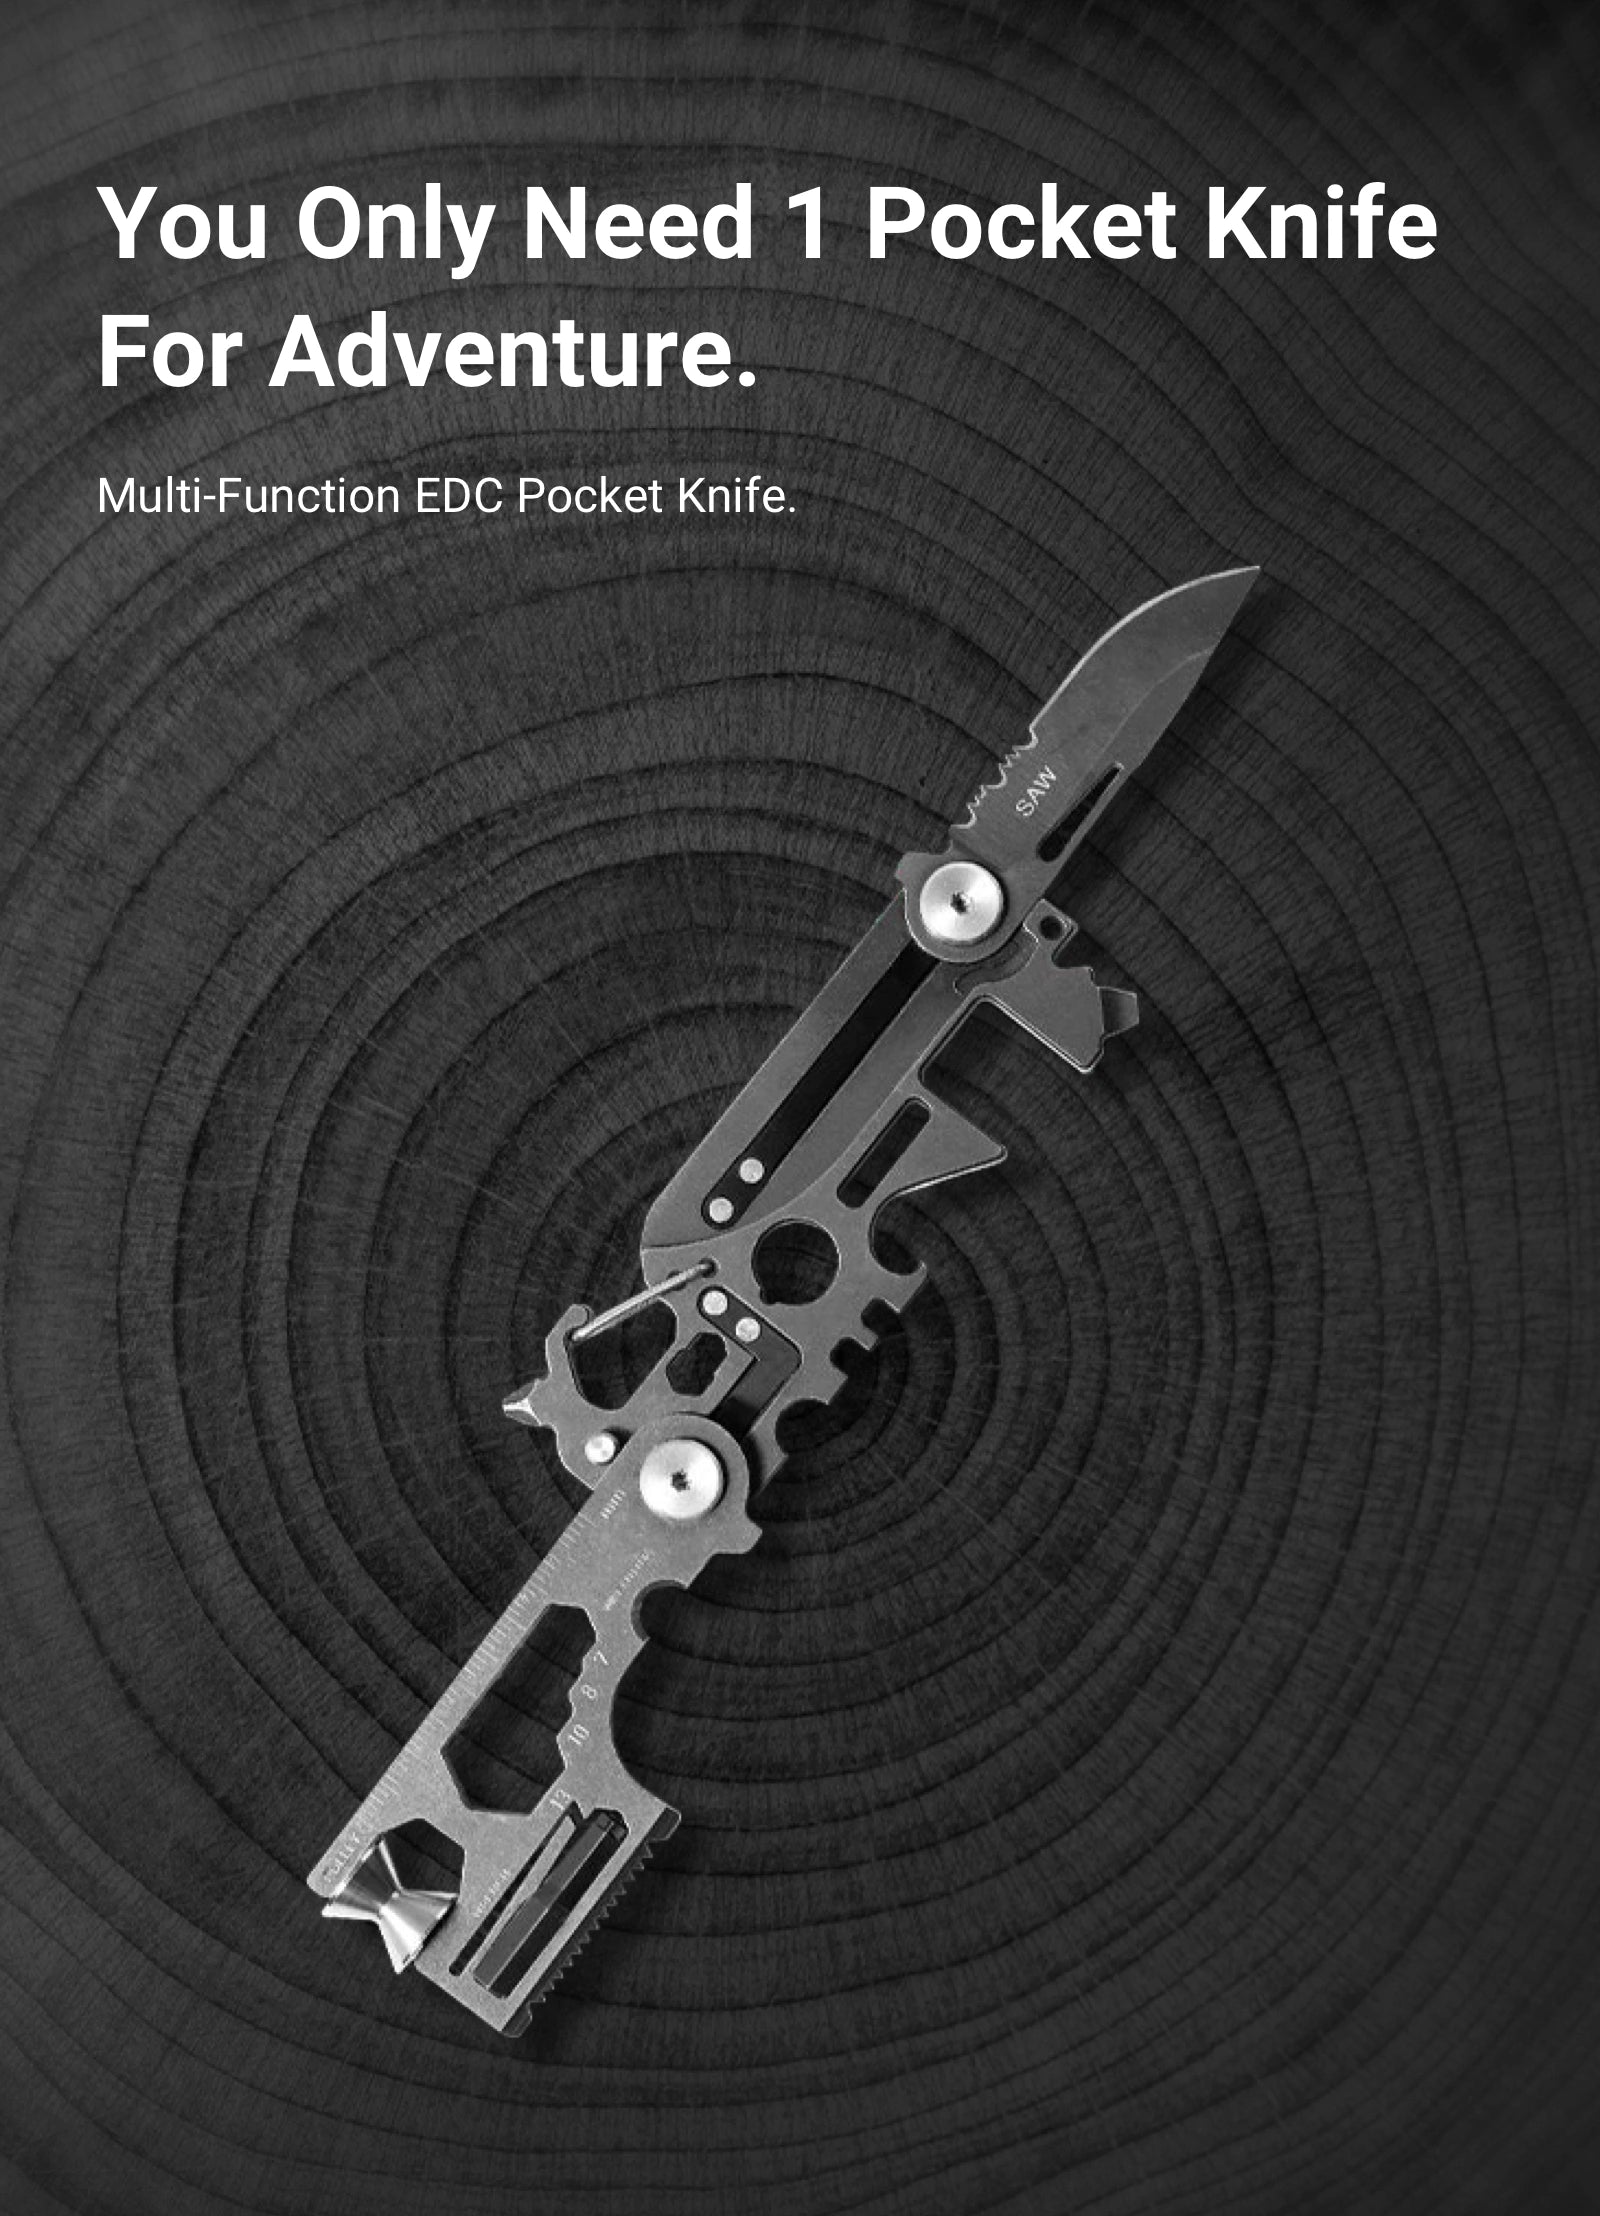 You Only Need 1 Pocket Knife For Adventure. Multi-Function EDC Pocket Knife.